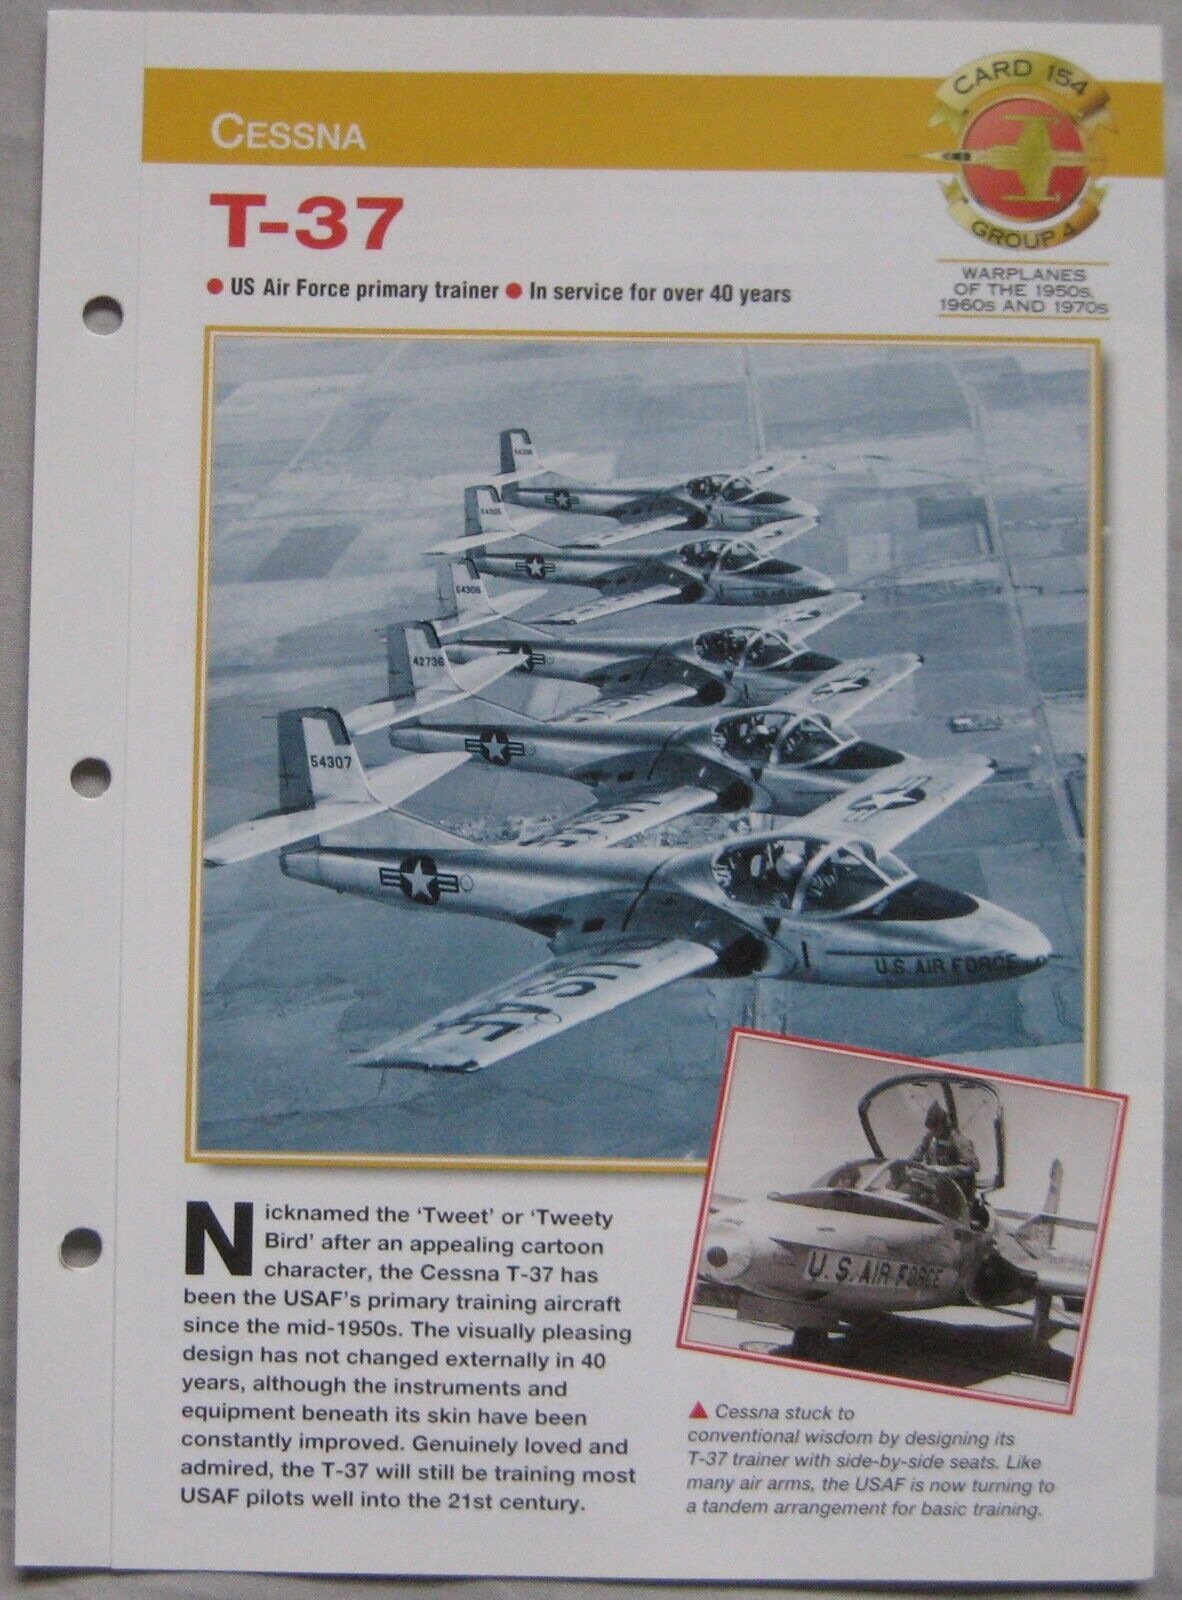 Aircraft of the World Card 154 , Group 4 - Cessna T-37